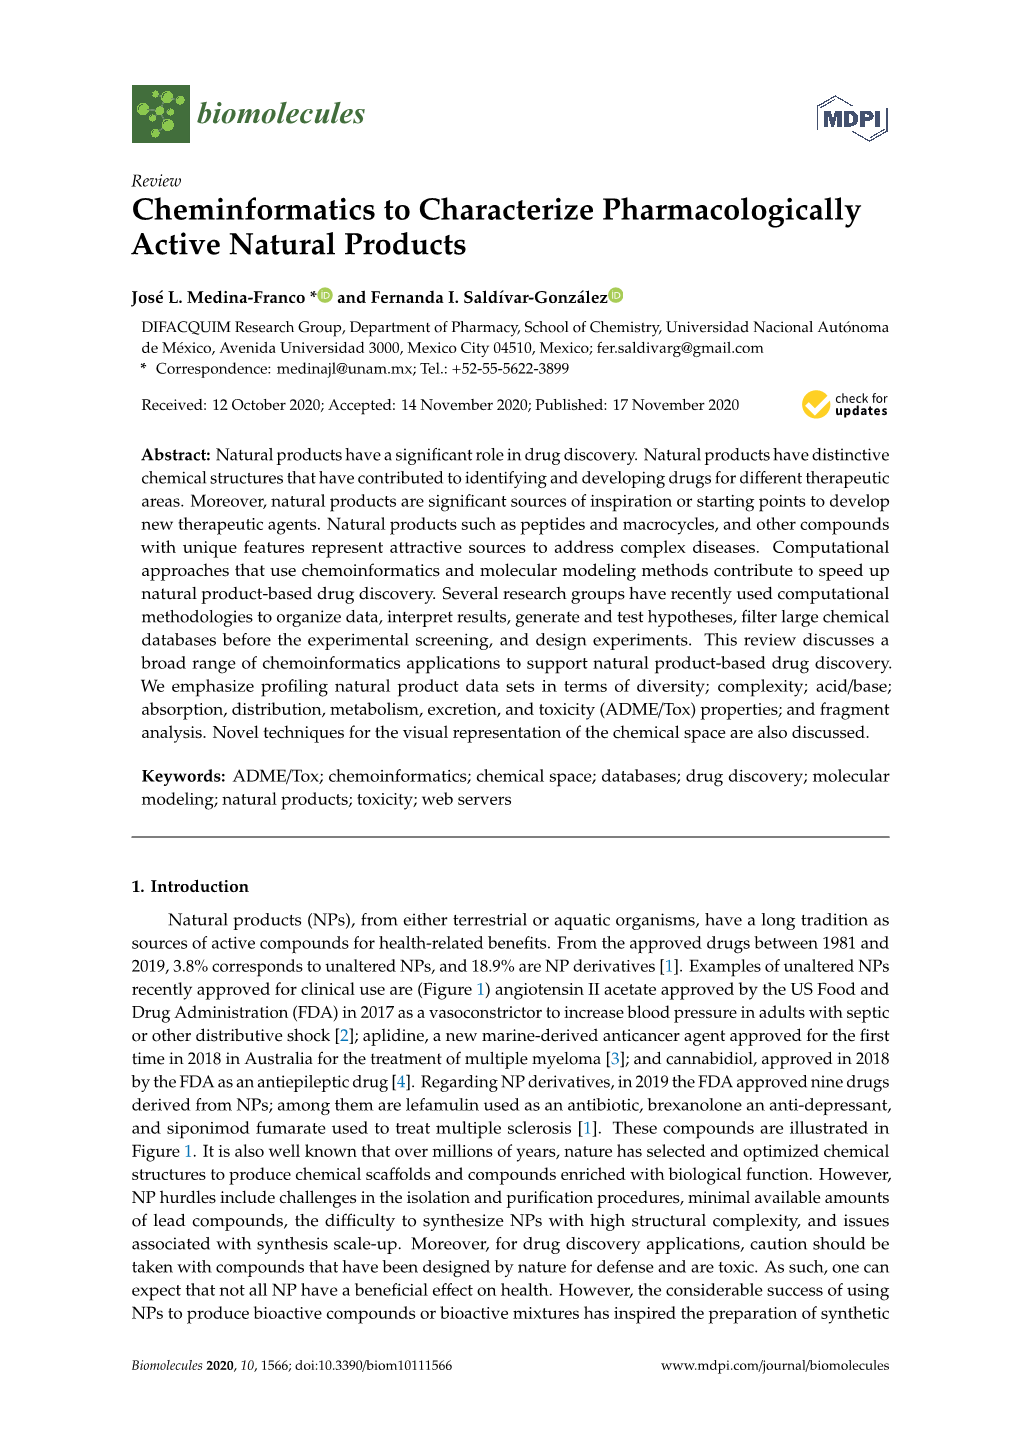 Cheminformatics to Characterize Pharmacologically Active Natural Products